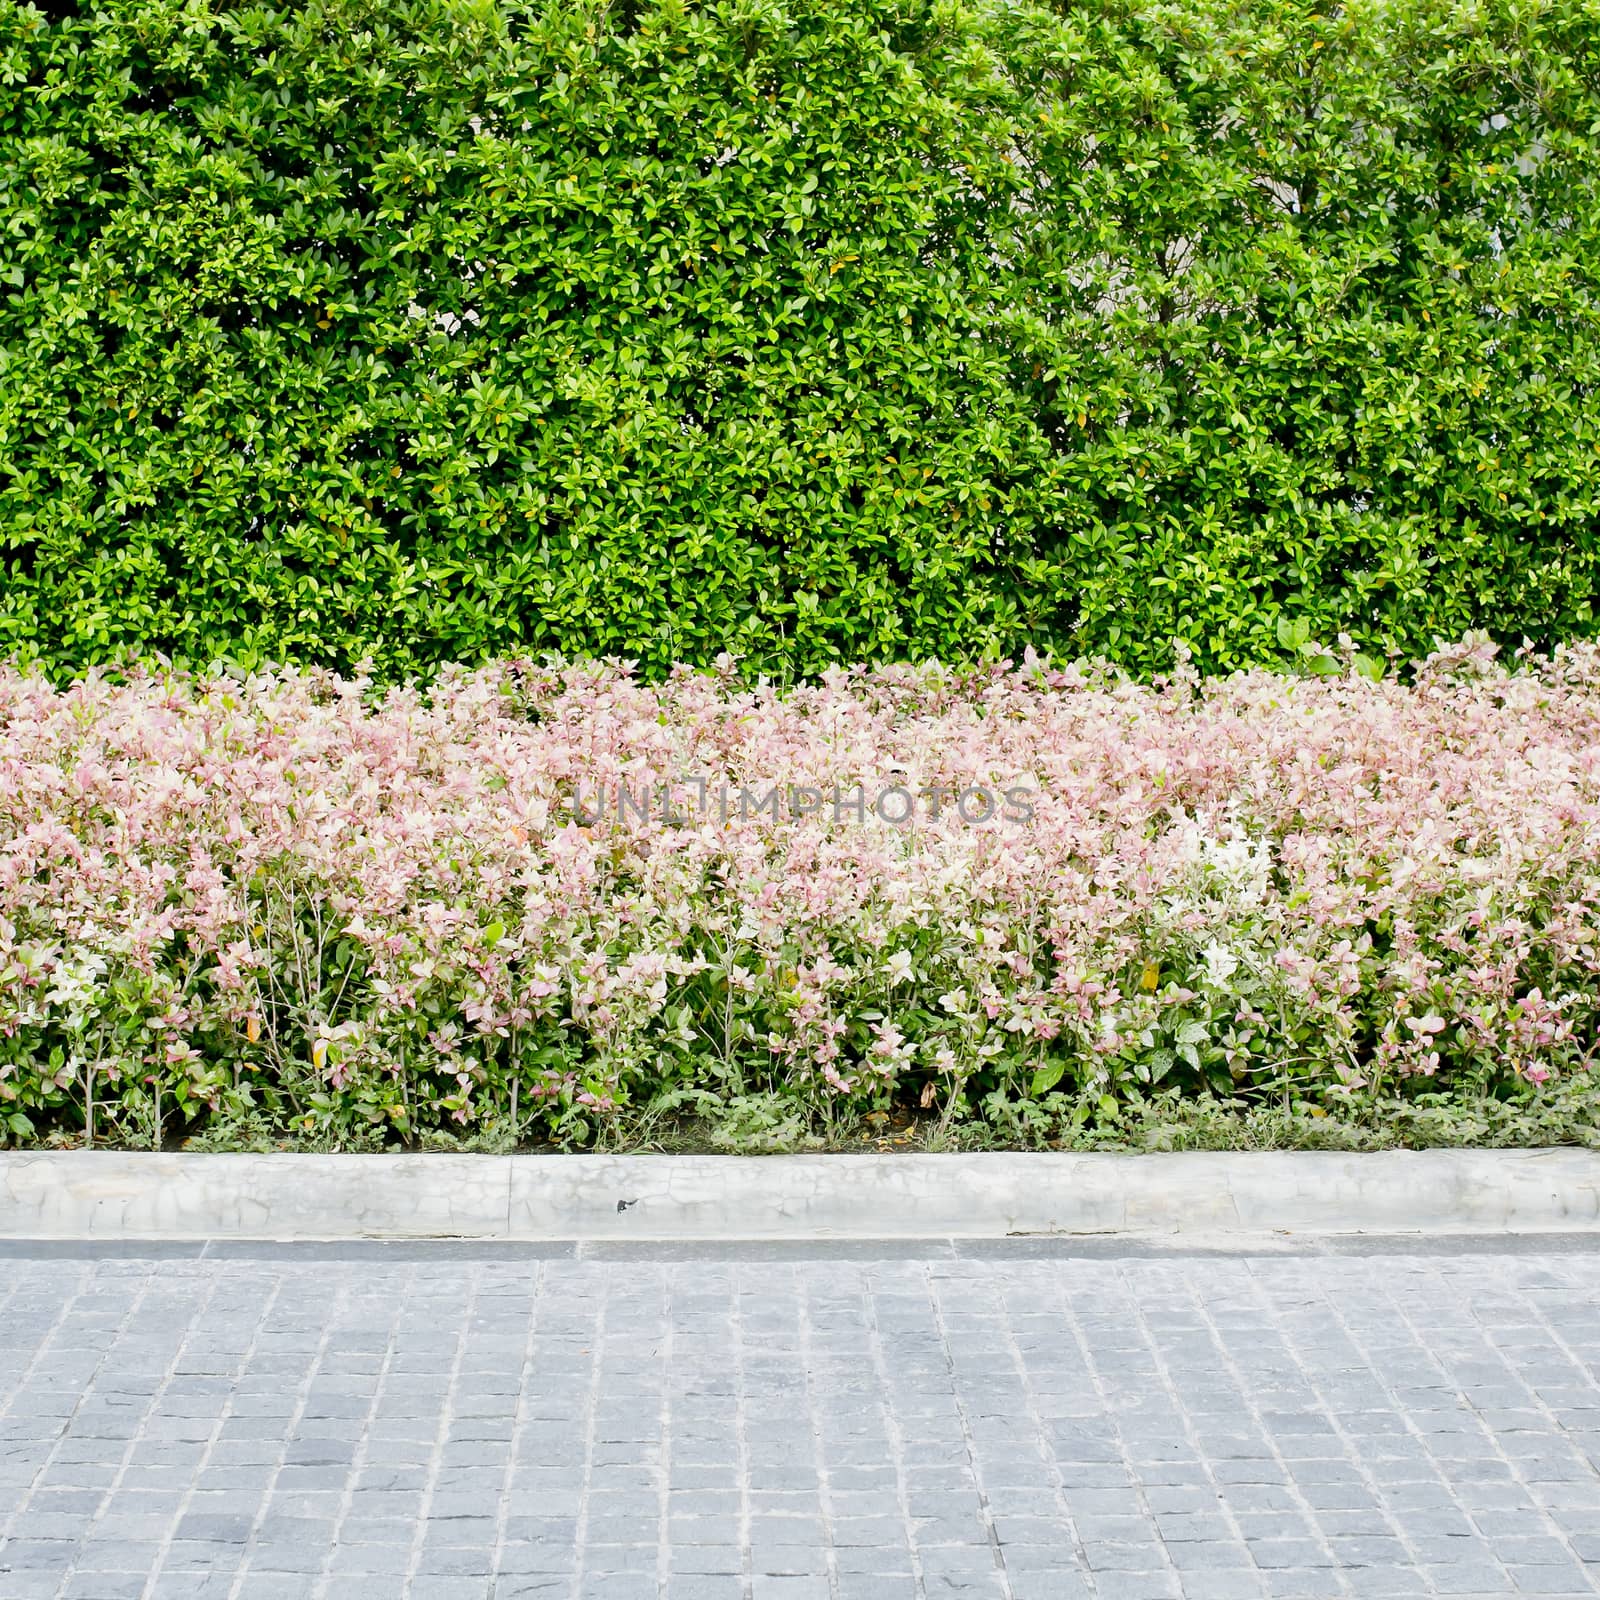 walkwayand pink flowers with green plants background by art9858